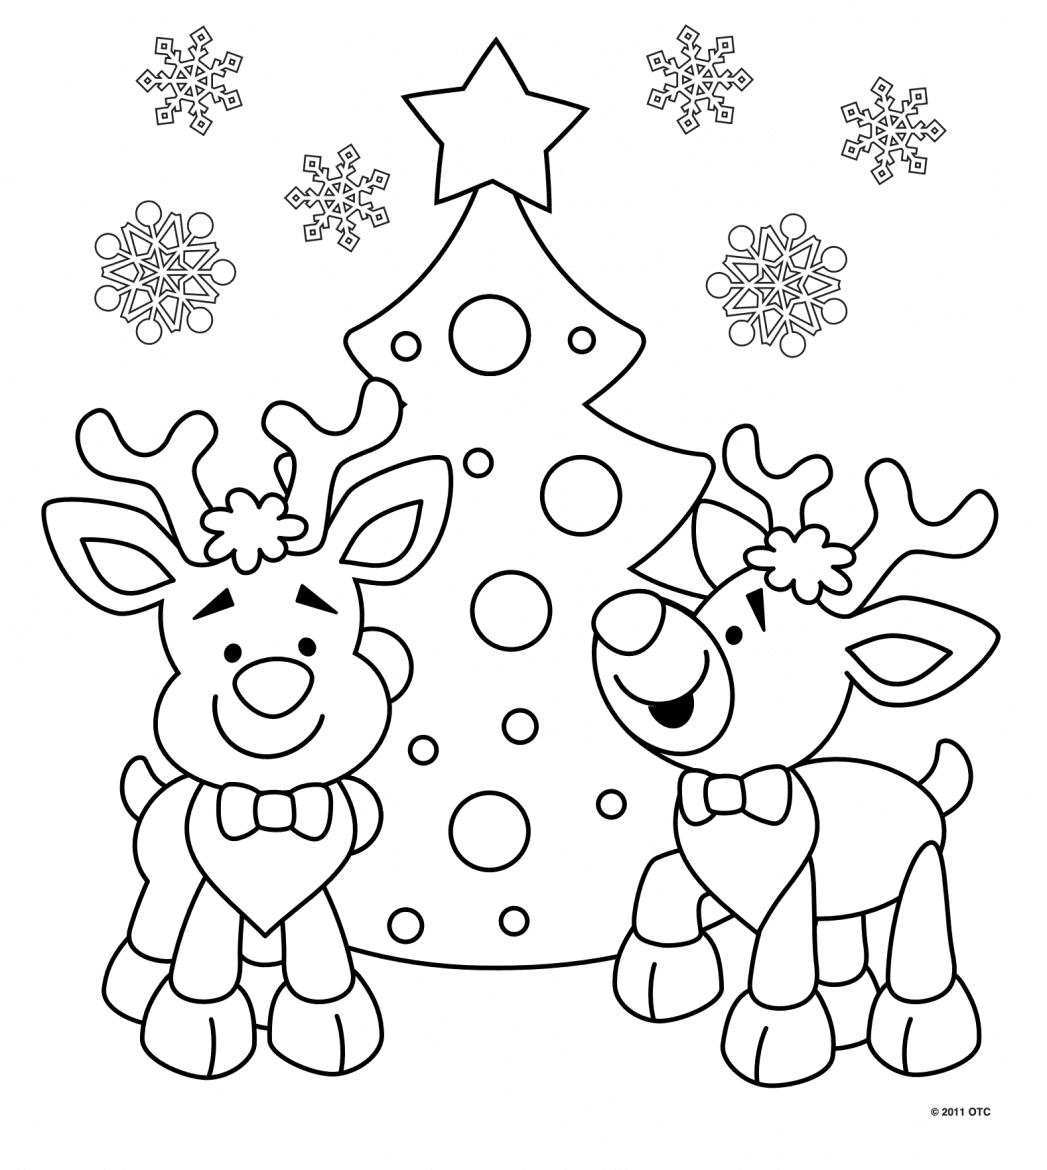 reindeer colouring in